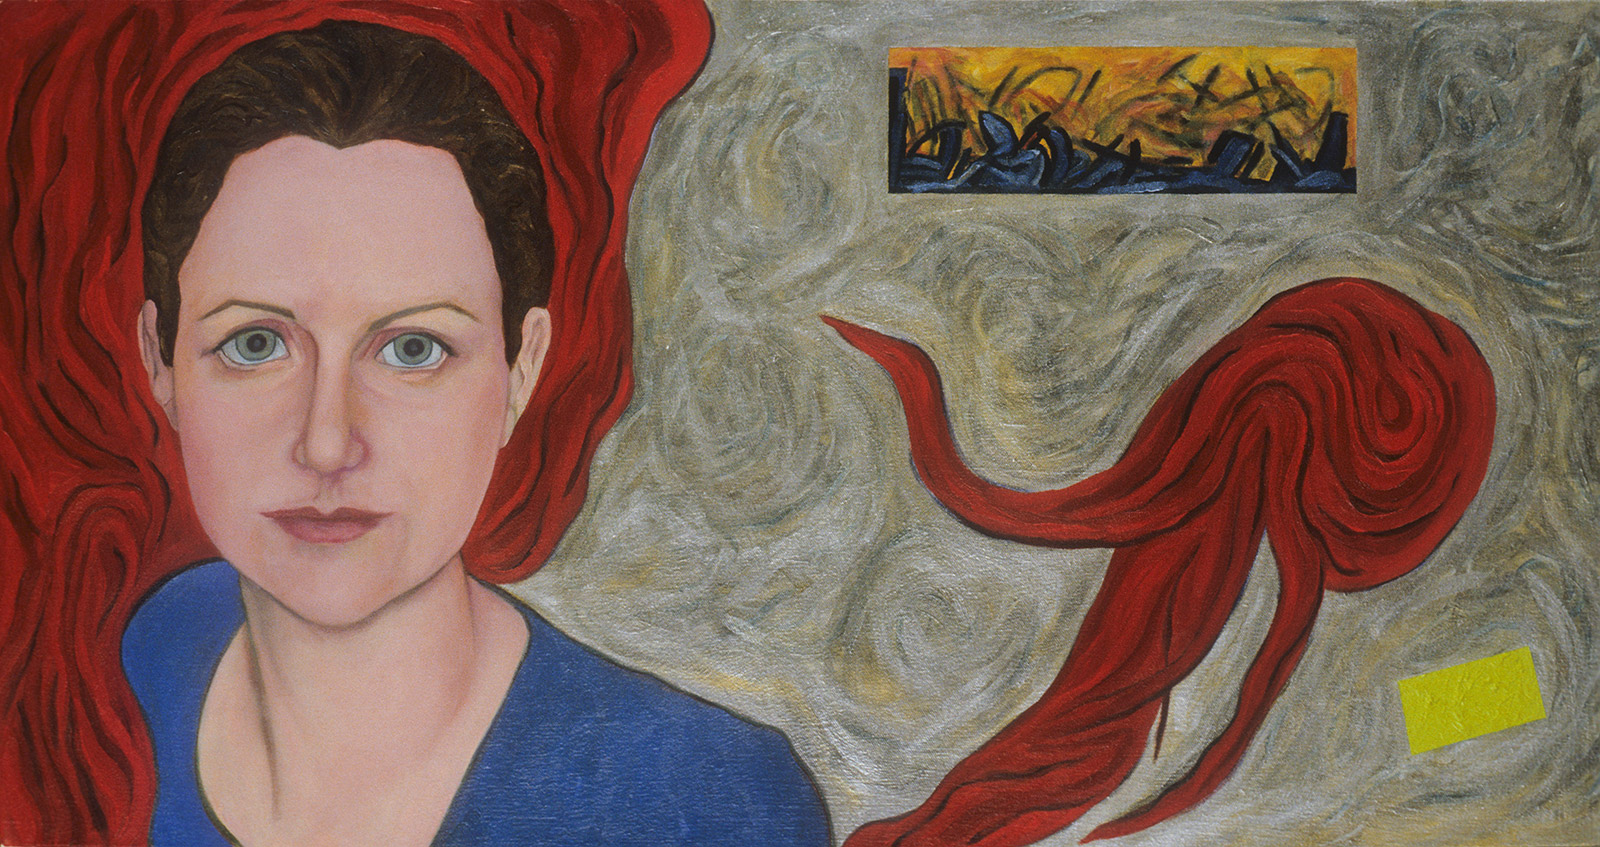 Rebecca, 2001 | 18” x 36” | Oil & Acrylic on Canvas | Collection of Rebecca Dreyfus, New York